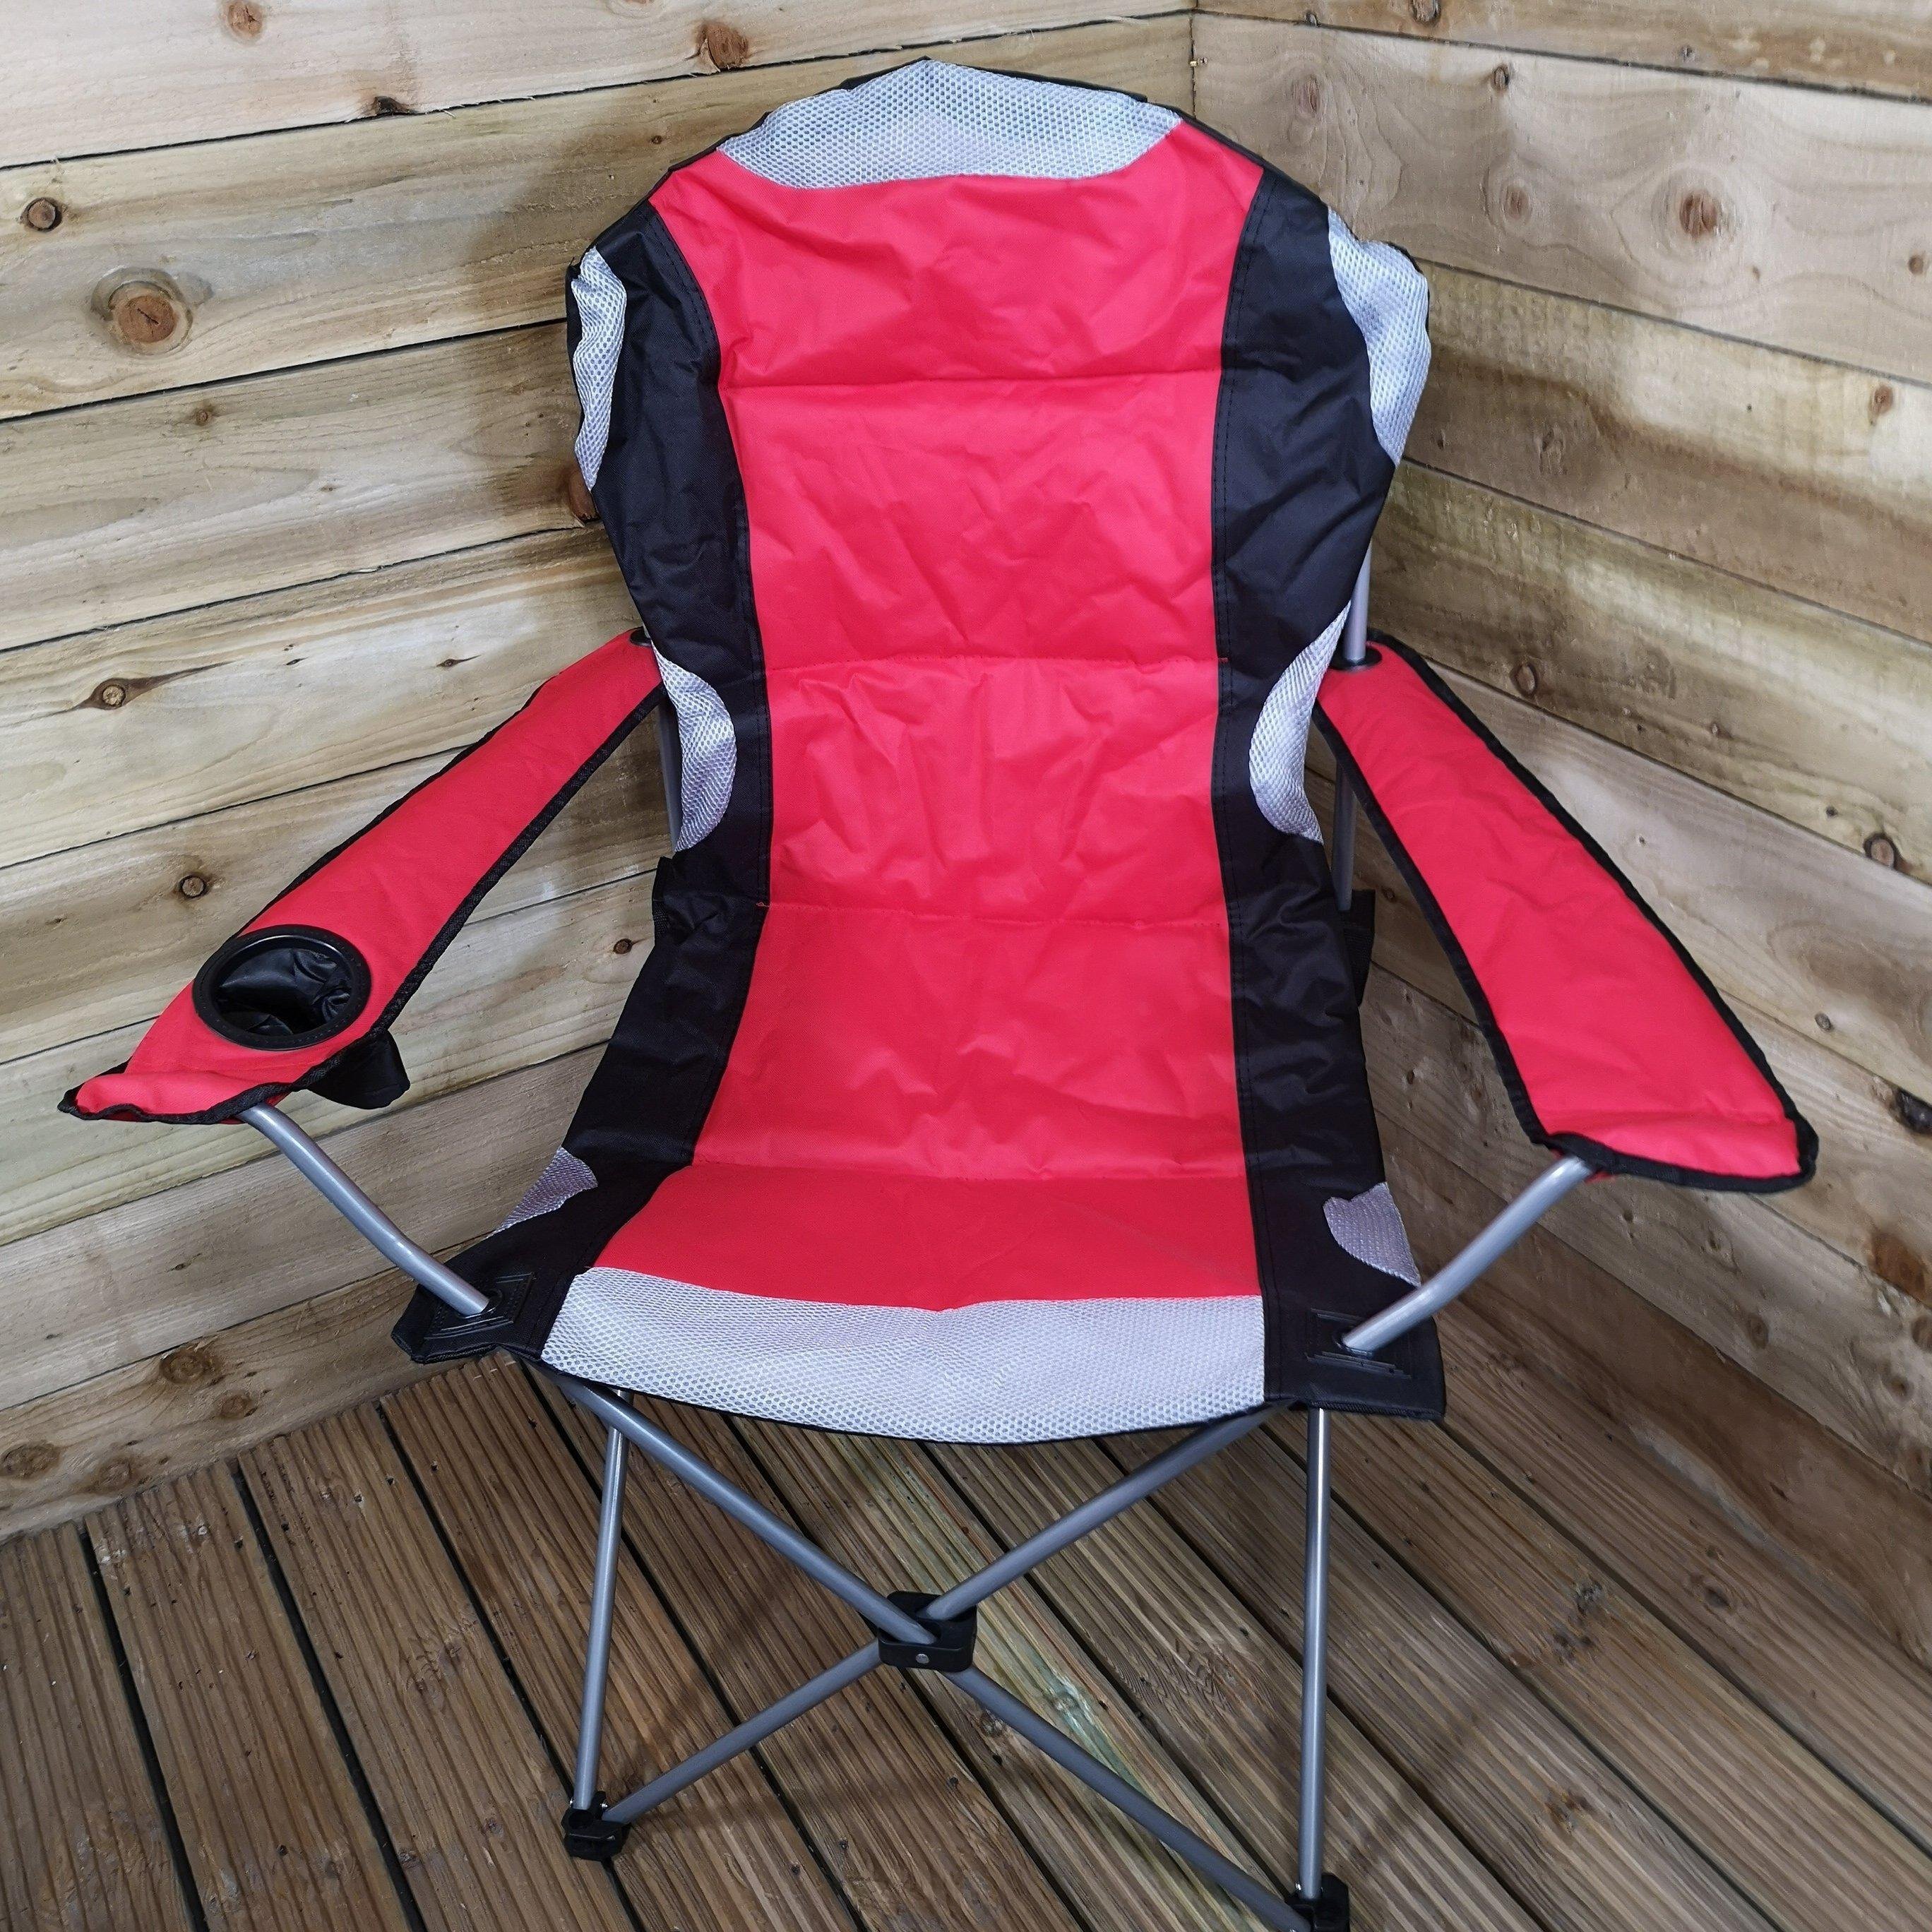 Luxury Padded High Back Folding Outdoor / Camping / Fishing Chair in Red - image 1